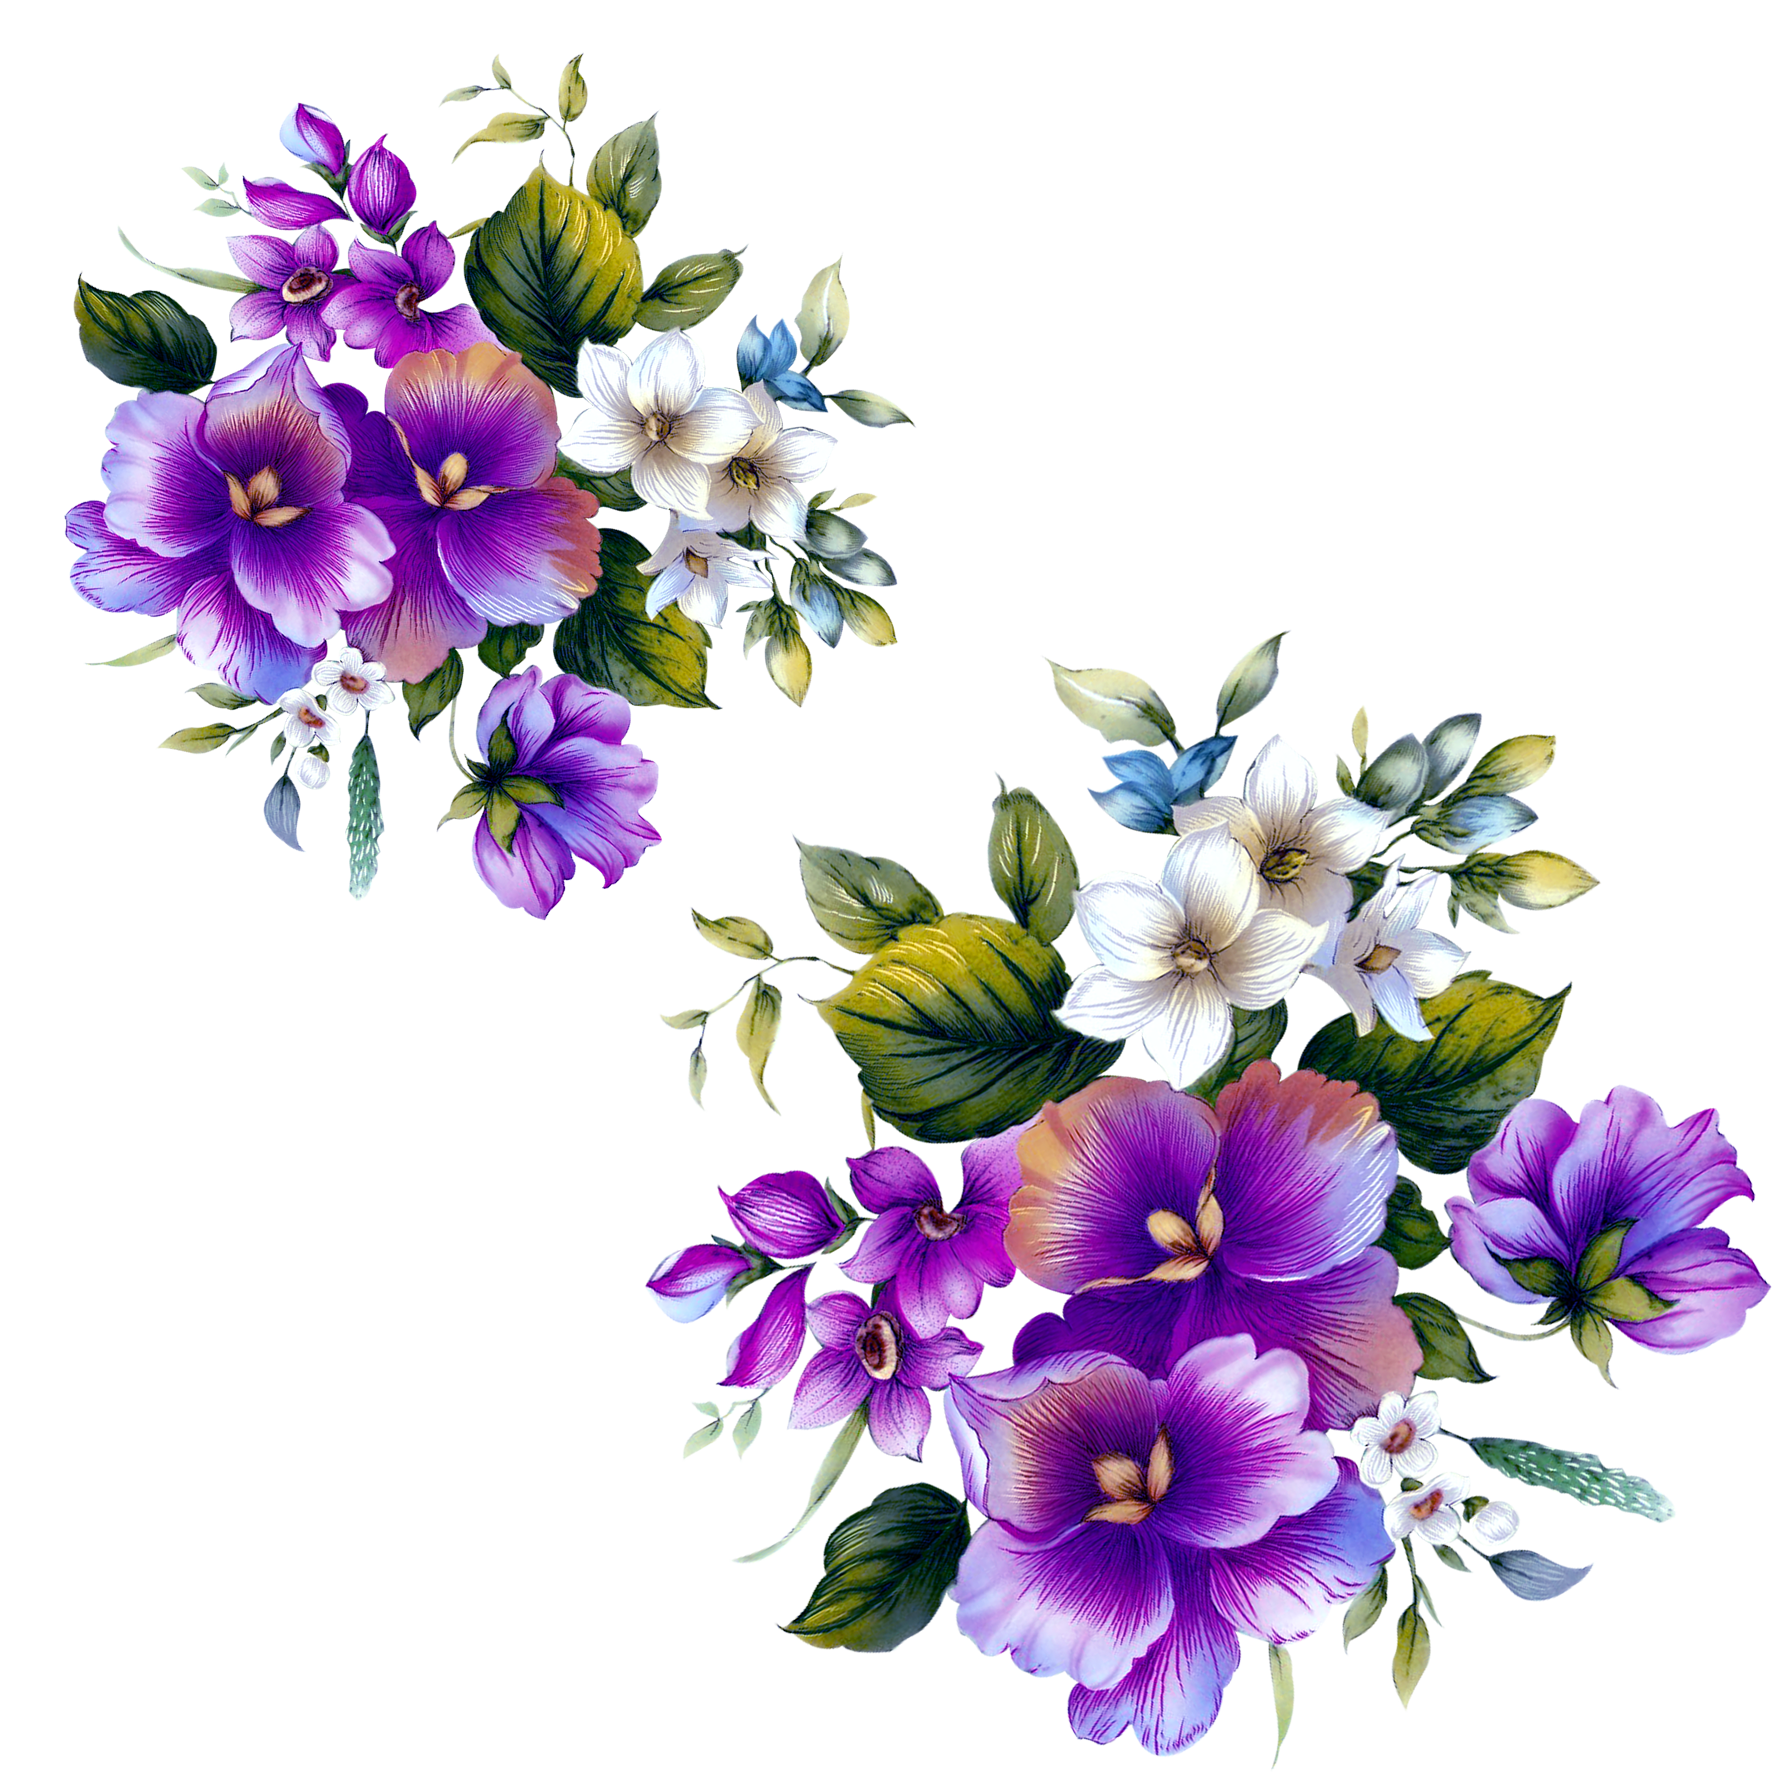 List 97+ Pictures List Of Purple Flowers With Pictures Full HD, 2k, 4k